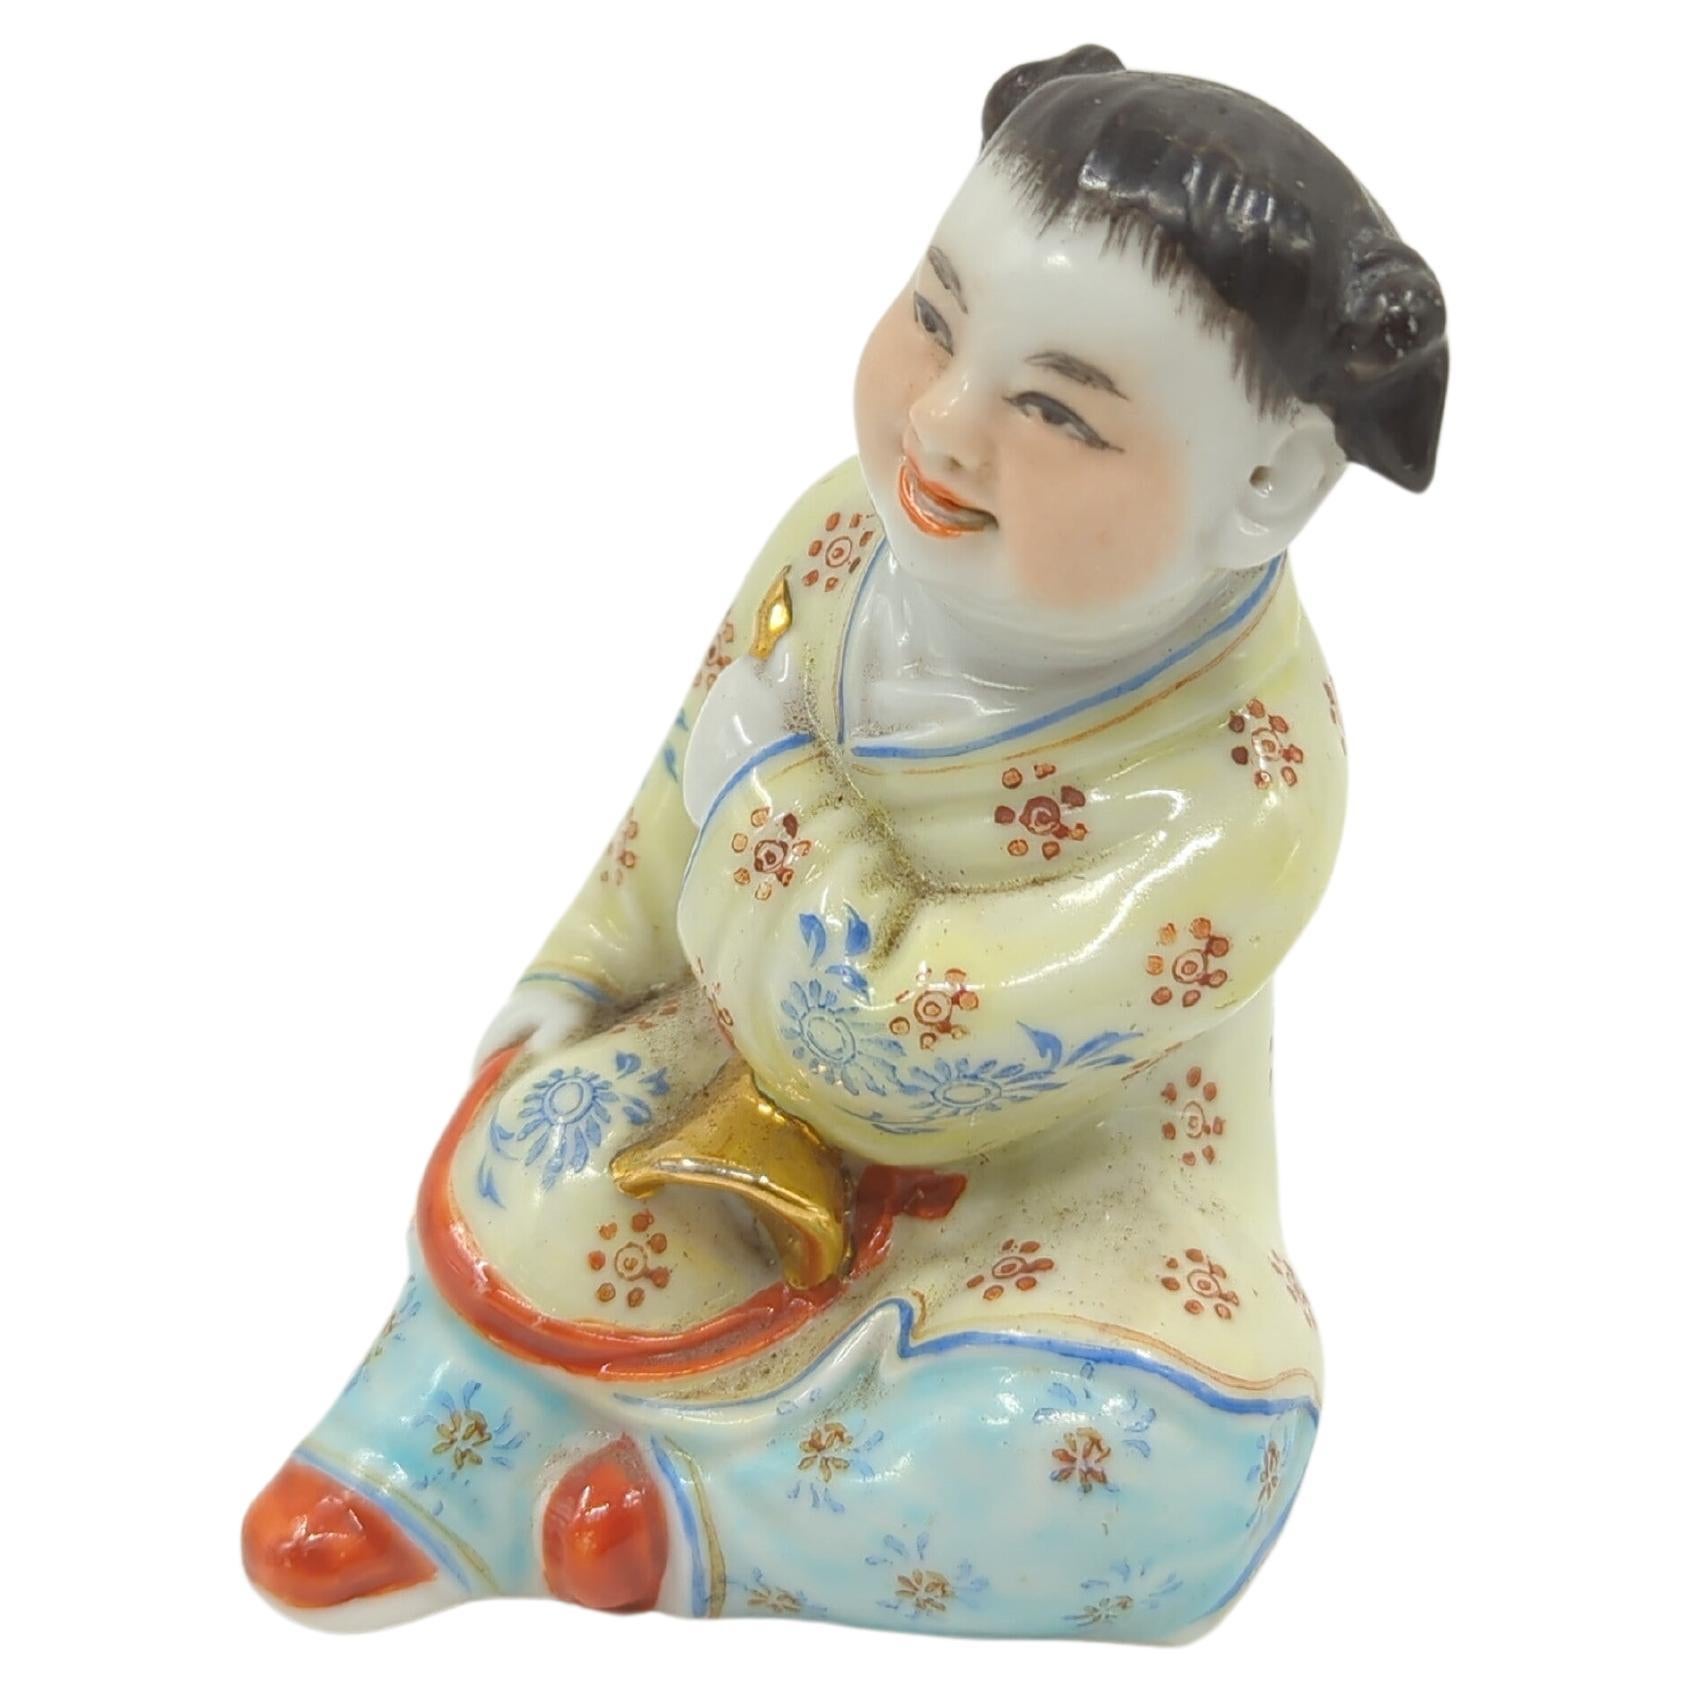 Near antique Chinese famille rose porcelain figurine of a playful, smiling child in a sitting pose, hands holding a golden object likely a instrument, bottom with impressed markings: 